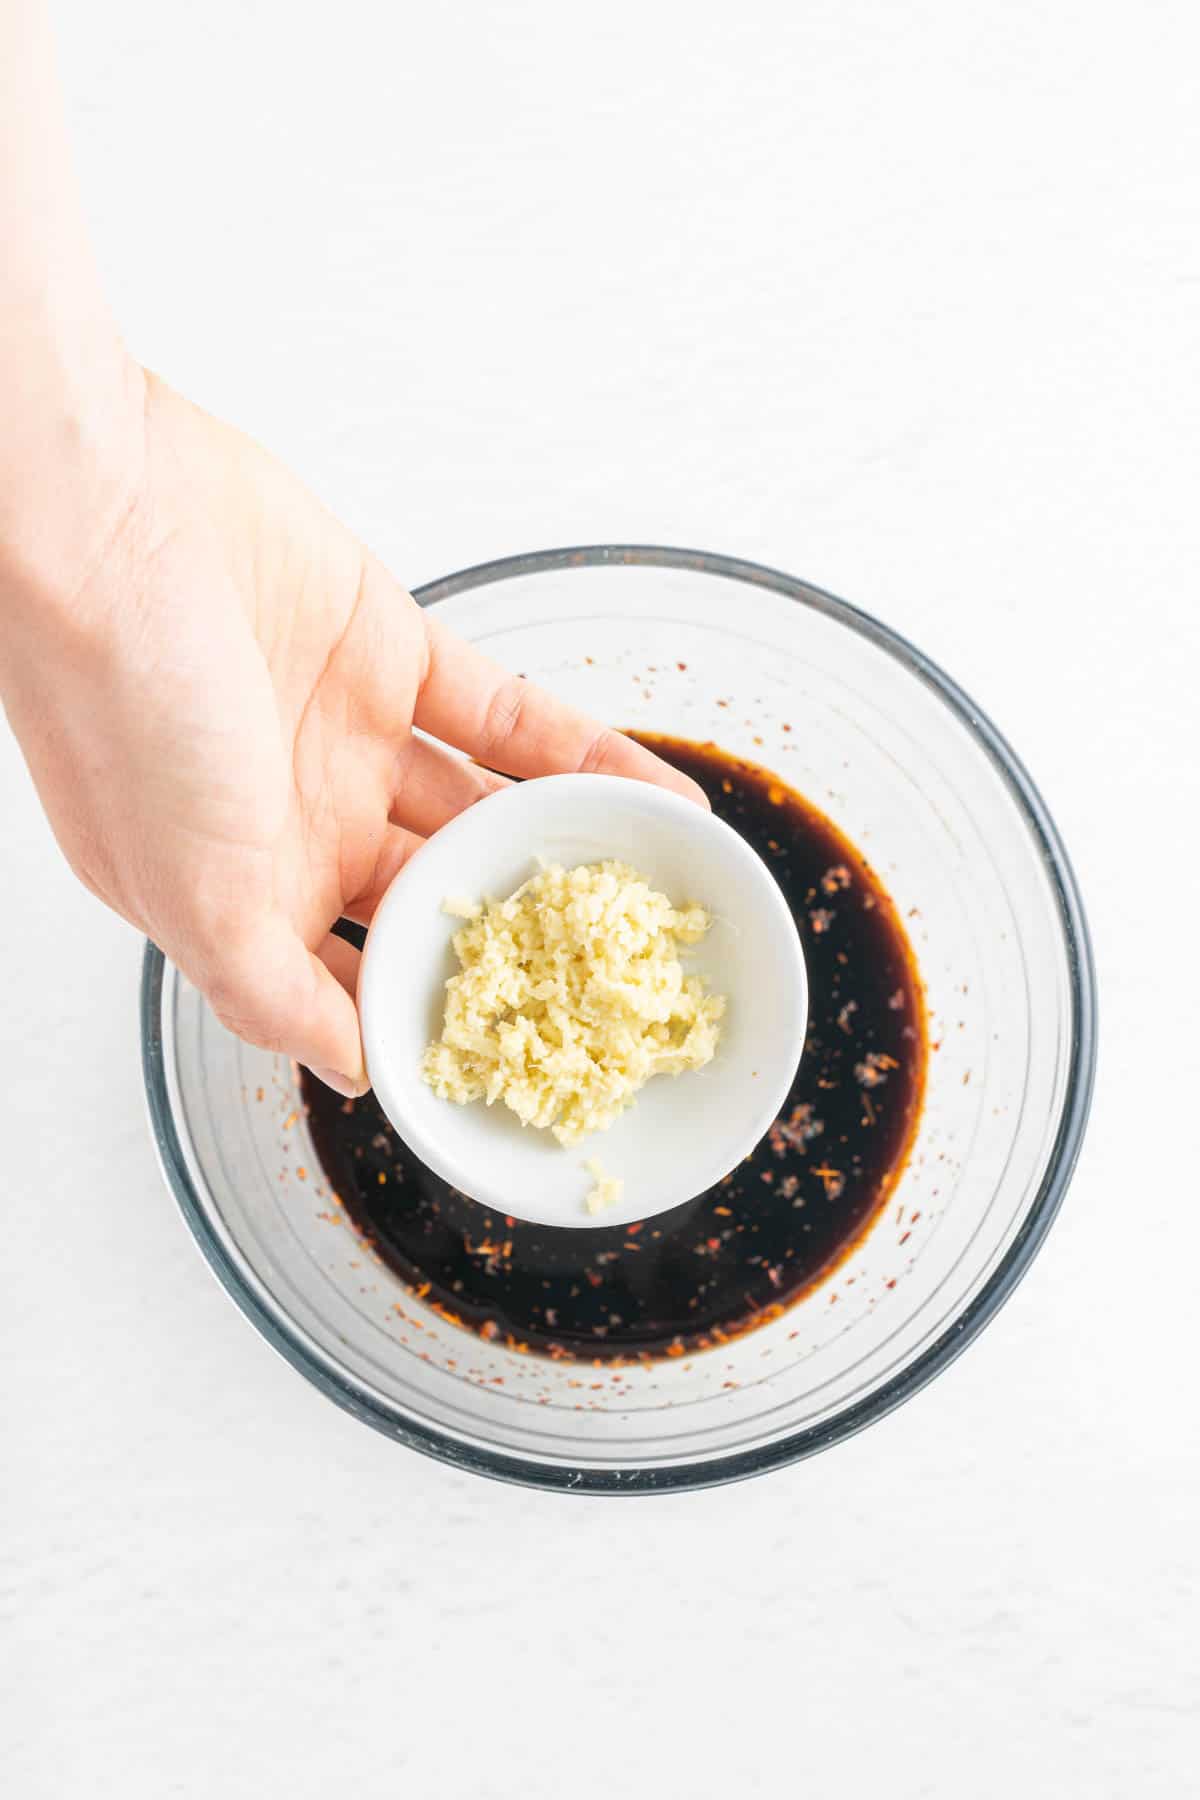 A hand holding a bowl of minced garlic over soy sauce and other ingredients.